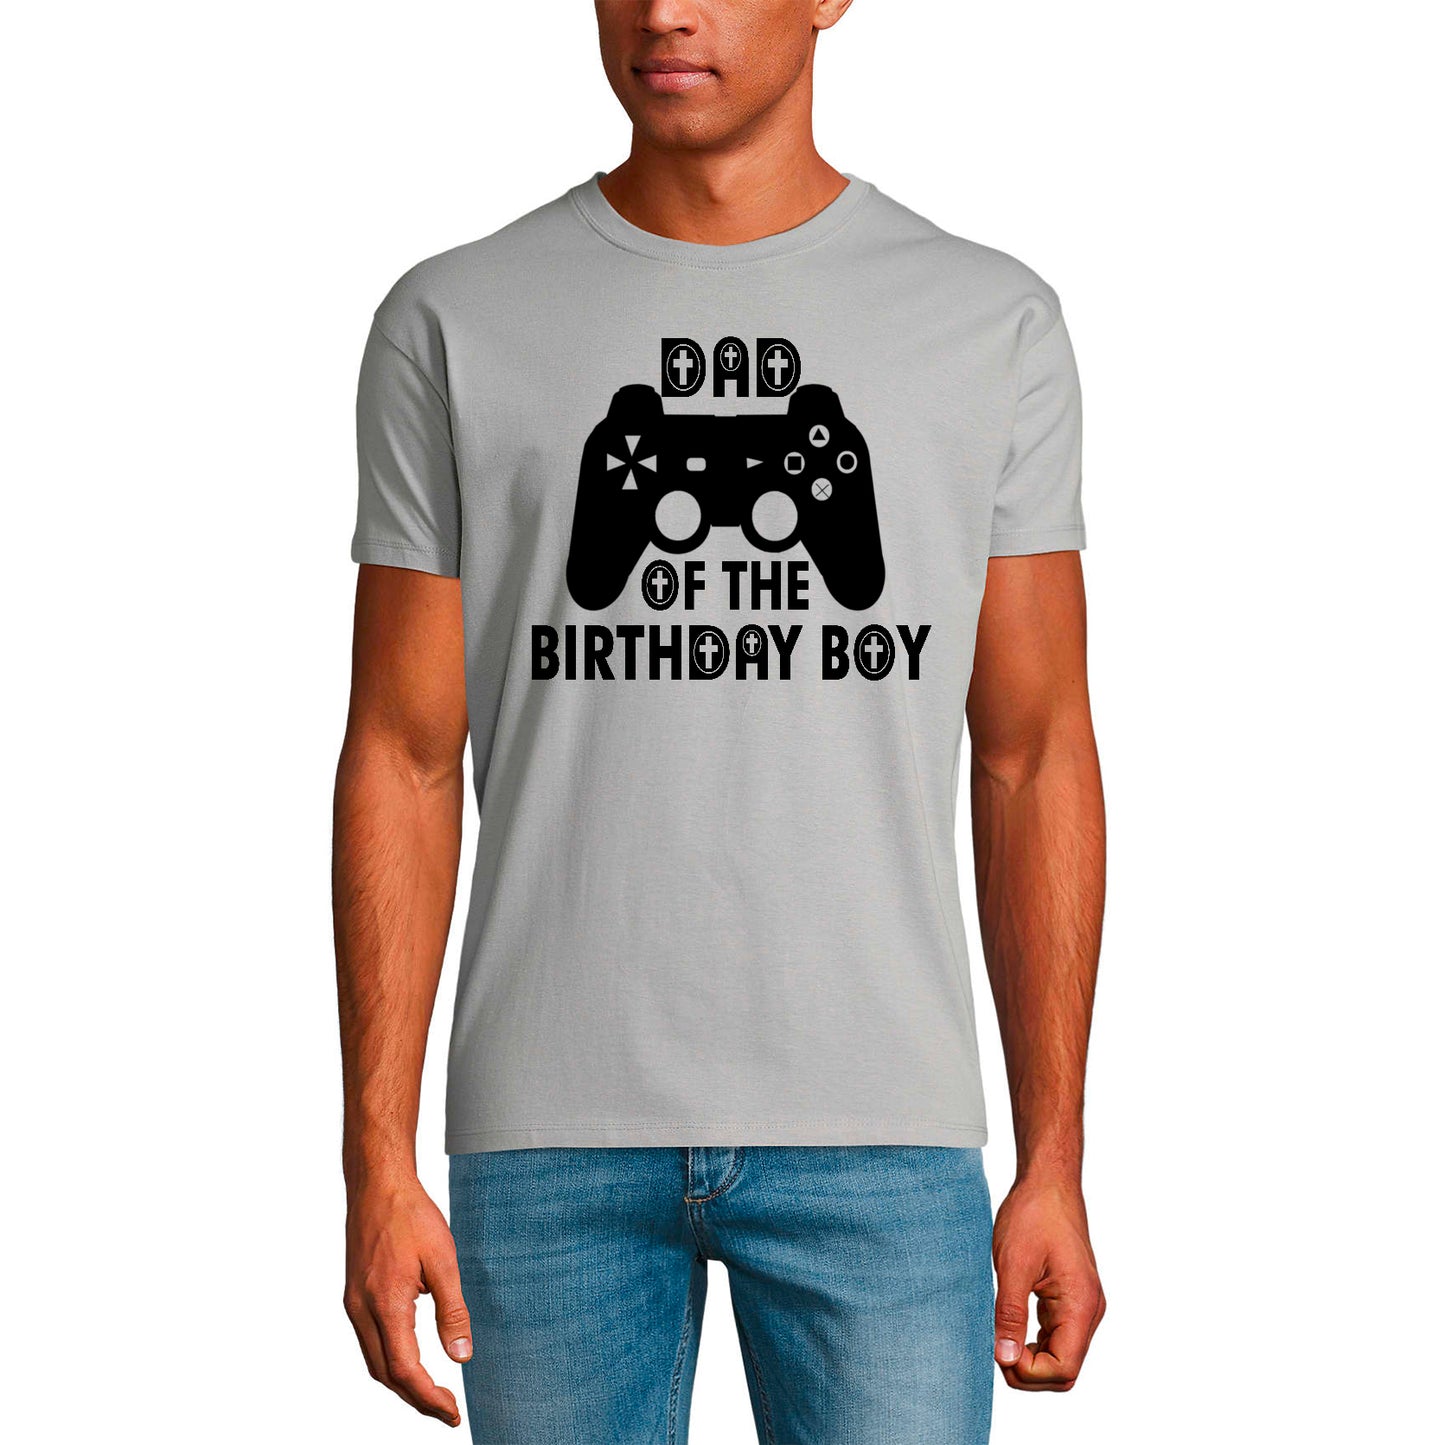 ULTRABASIC Men's T-Shirt Dad of the Birthday Boy - Gaming Shirt for Player mode on level up dad gamer i paused my game alien player ufo playstation tee shirt clothes gaming apparel gifts super mario nintendo call of duty graphic tshirt video game funny geek gift for the gamer fortnite pubg humor son father birthday